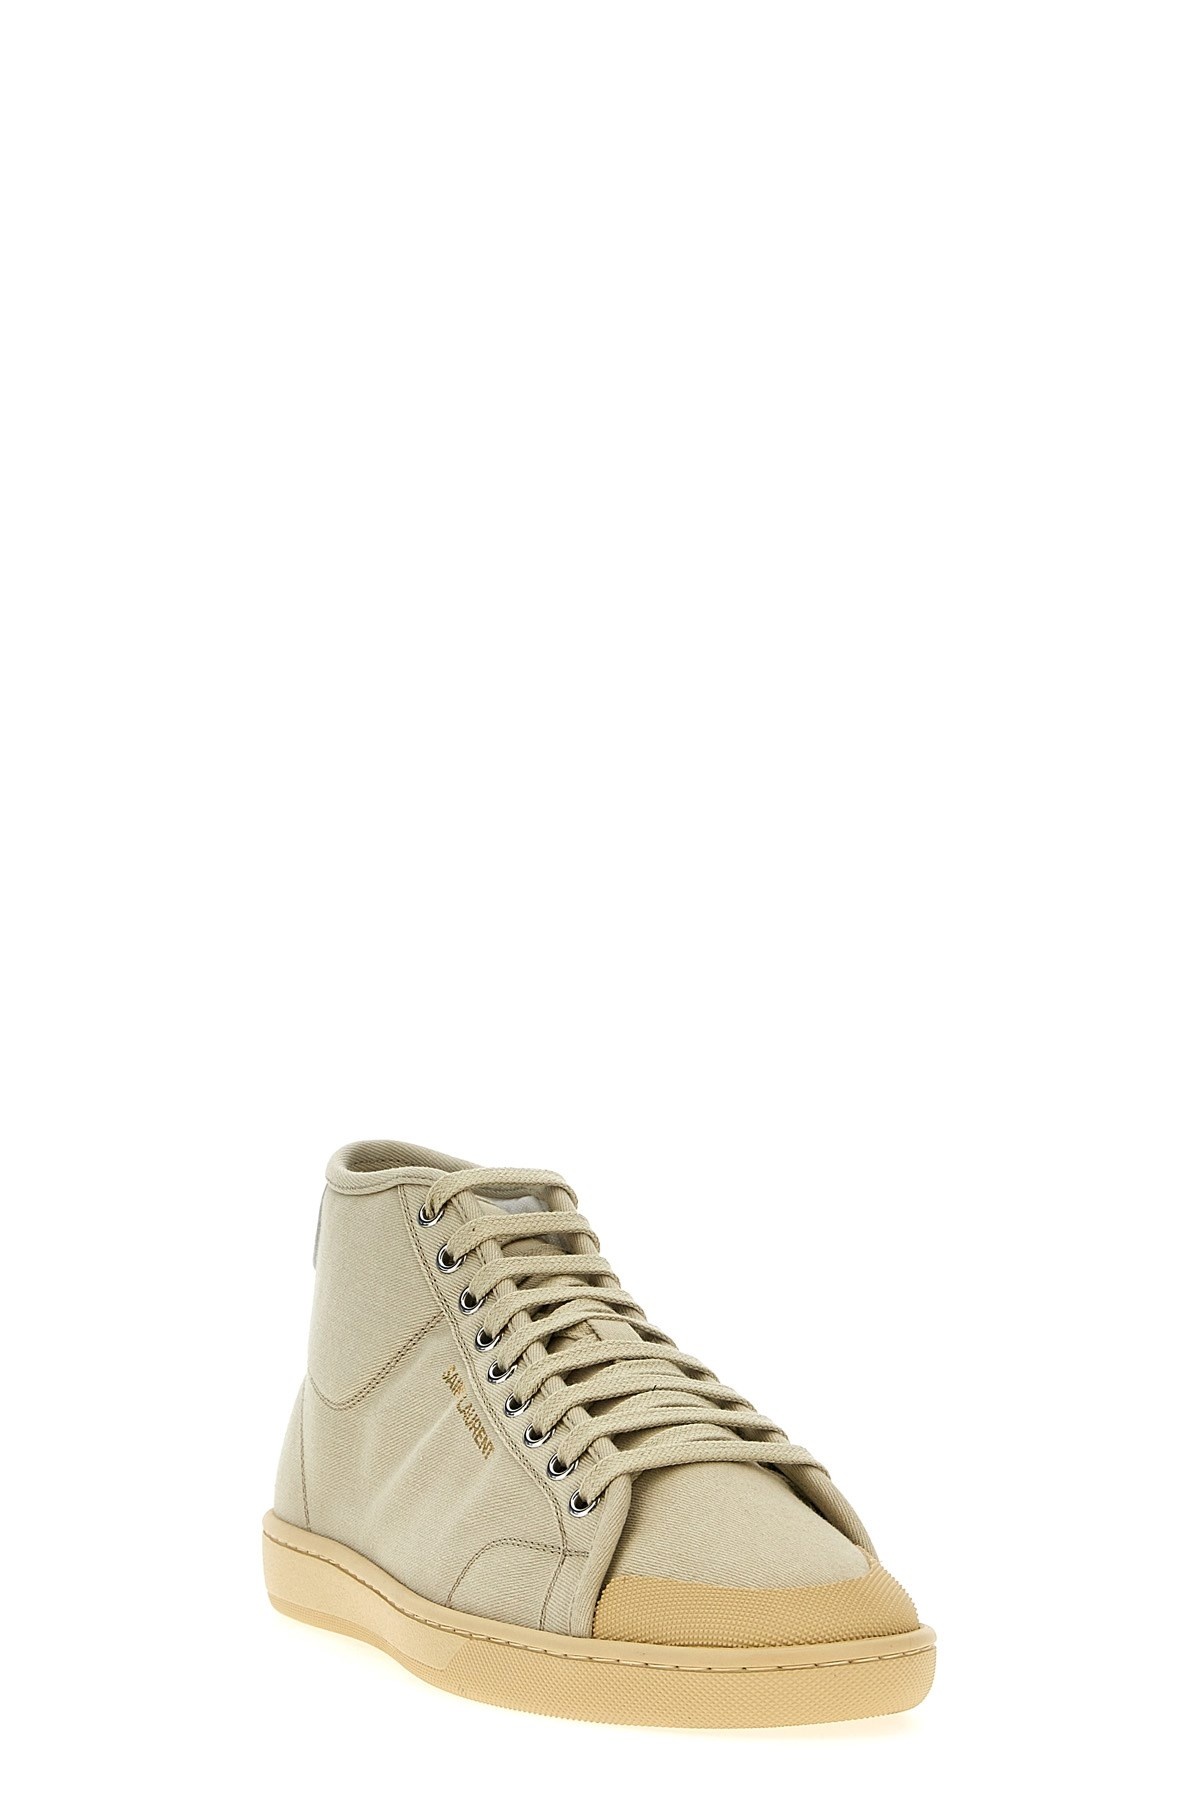 'Court Classic' sneakers - 2